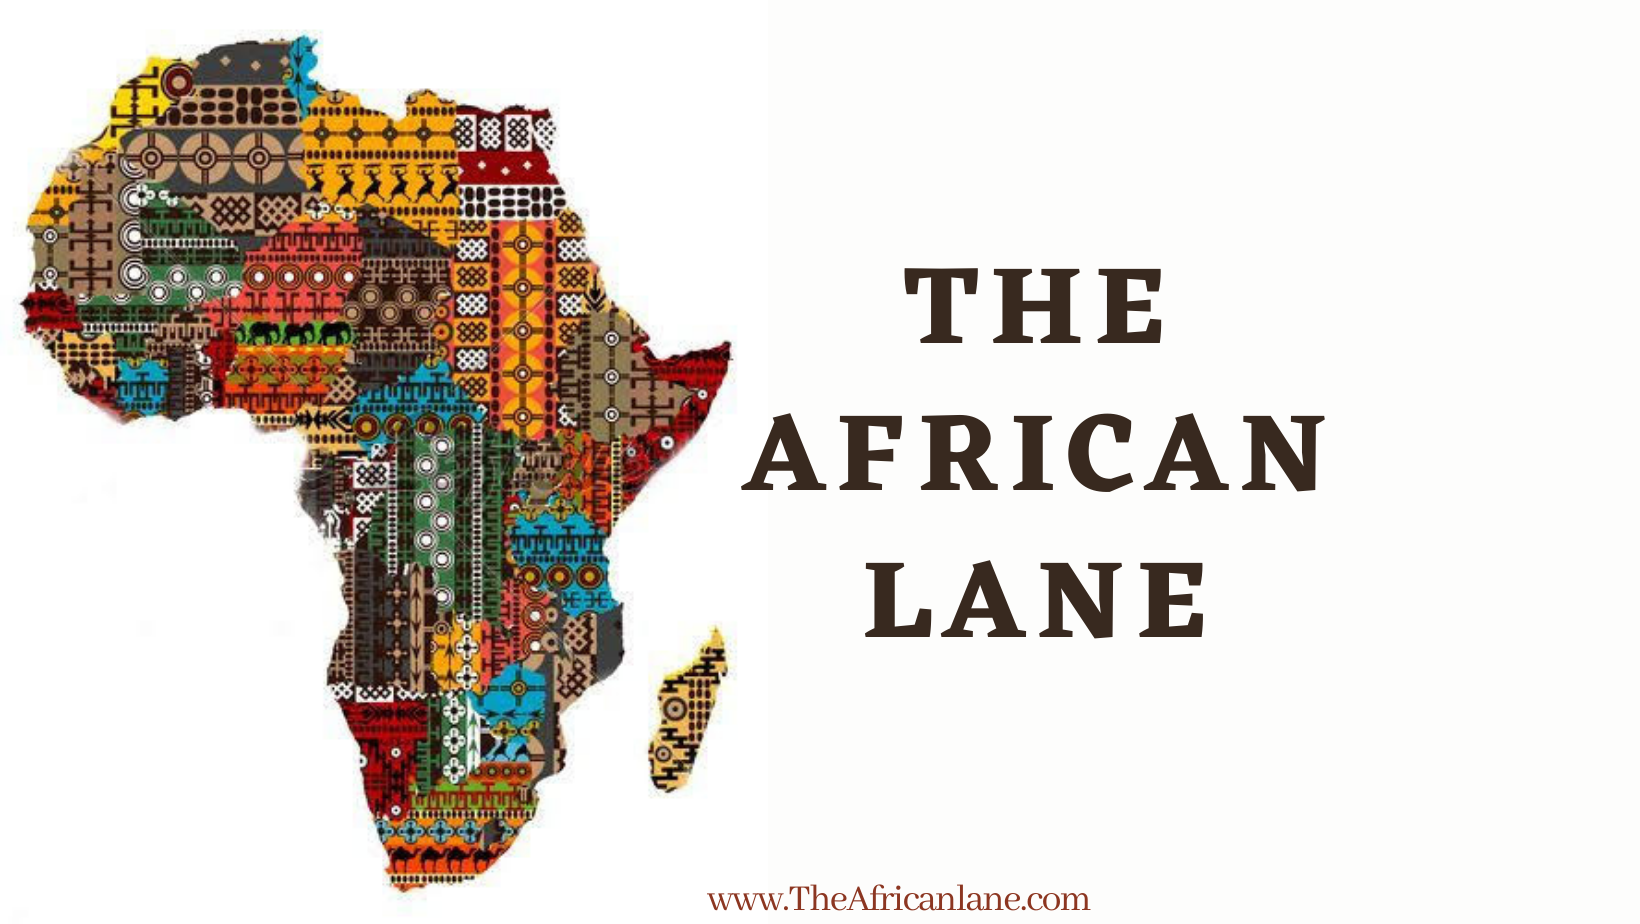 The African Lane